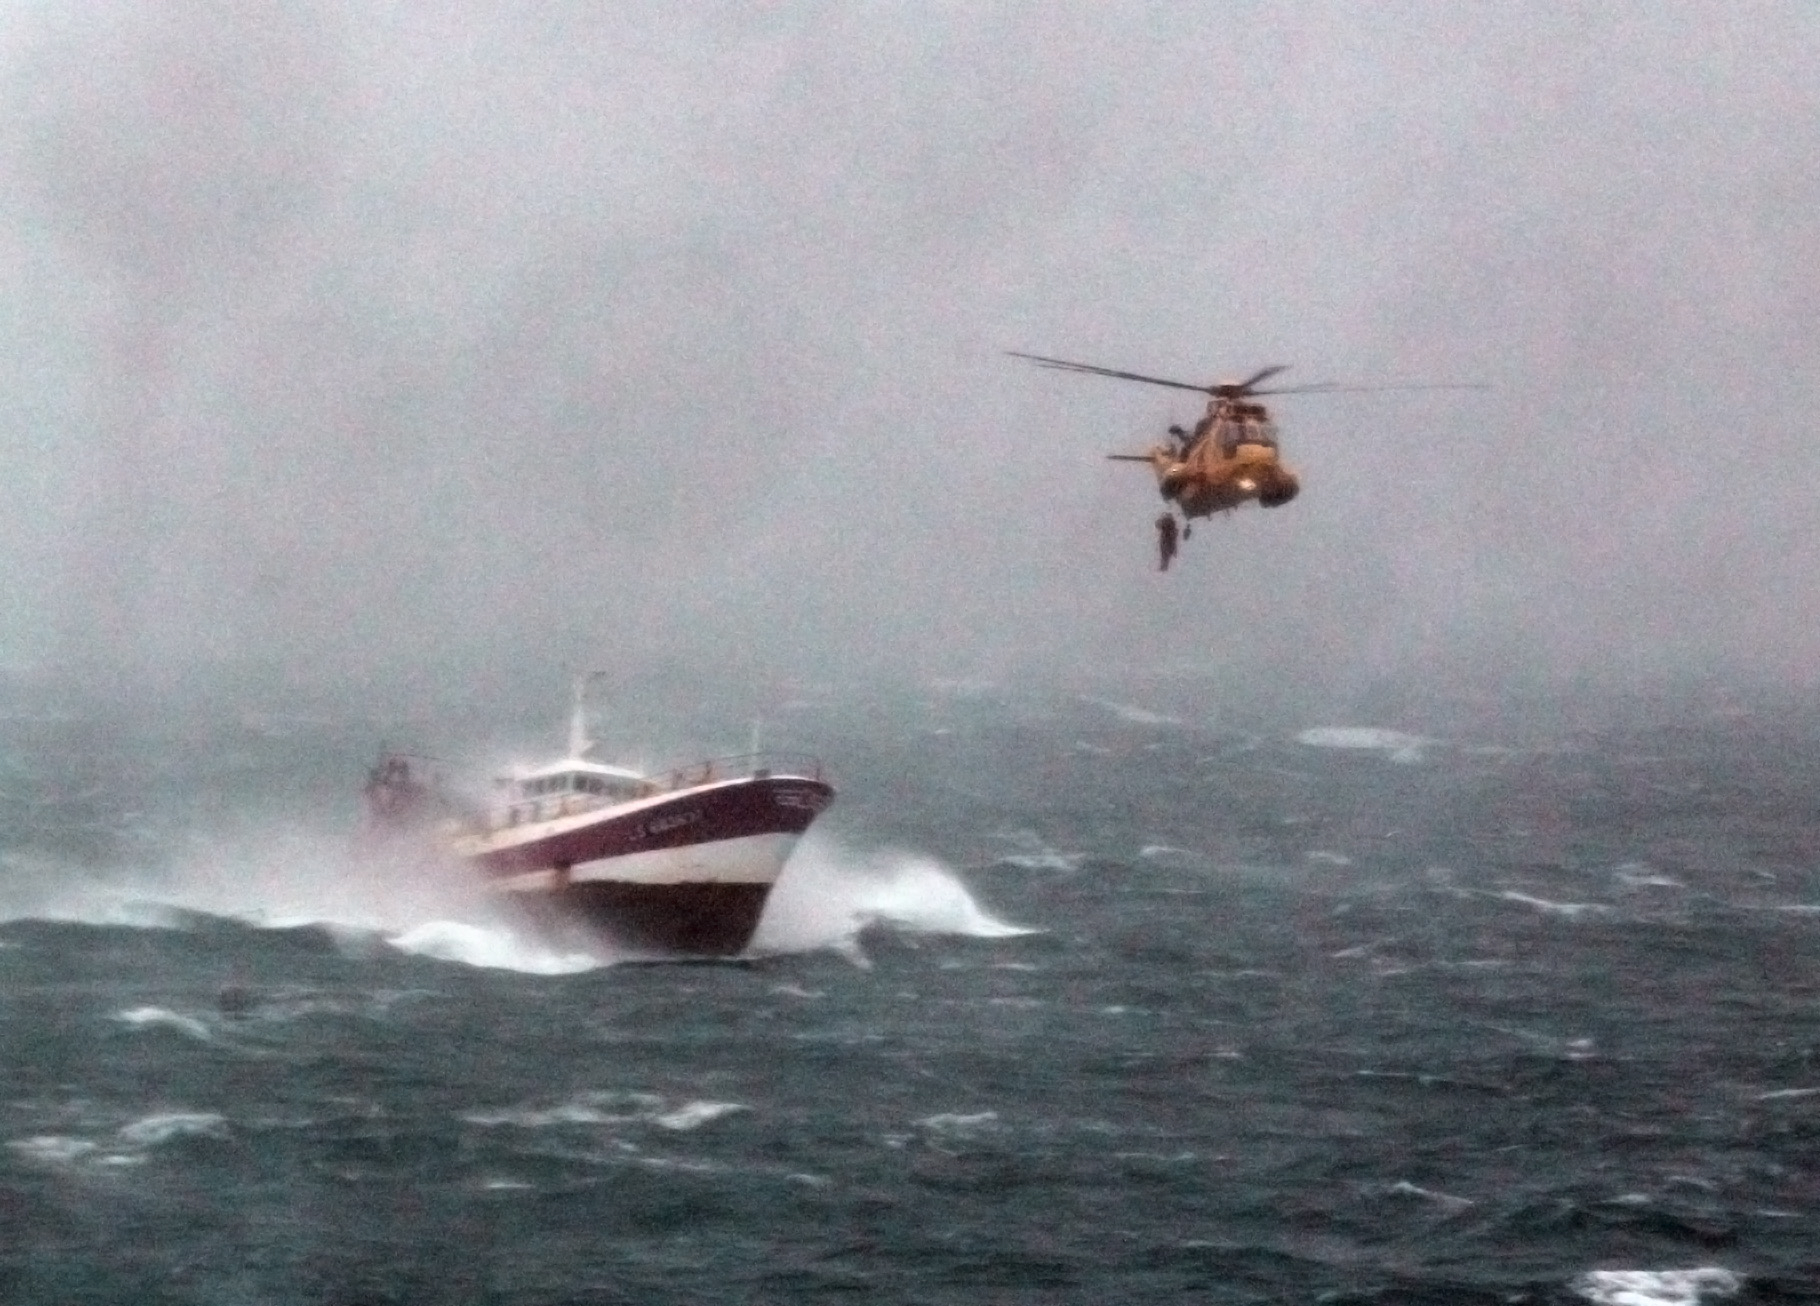 Royal_Navy_Sea_King_Helicopter_Comes_to_the_Aid_of_French_Fishing_Vessel_%27Alf%27_in_the_Irish_Sea_MOD_45155325.jpg